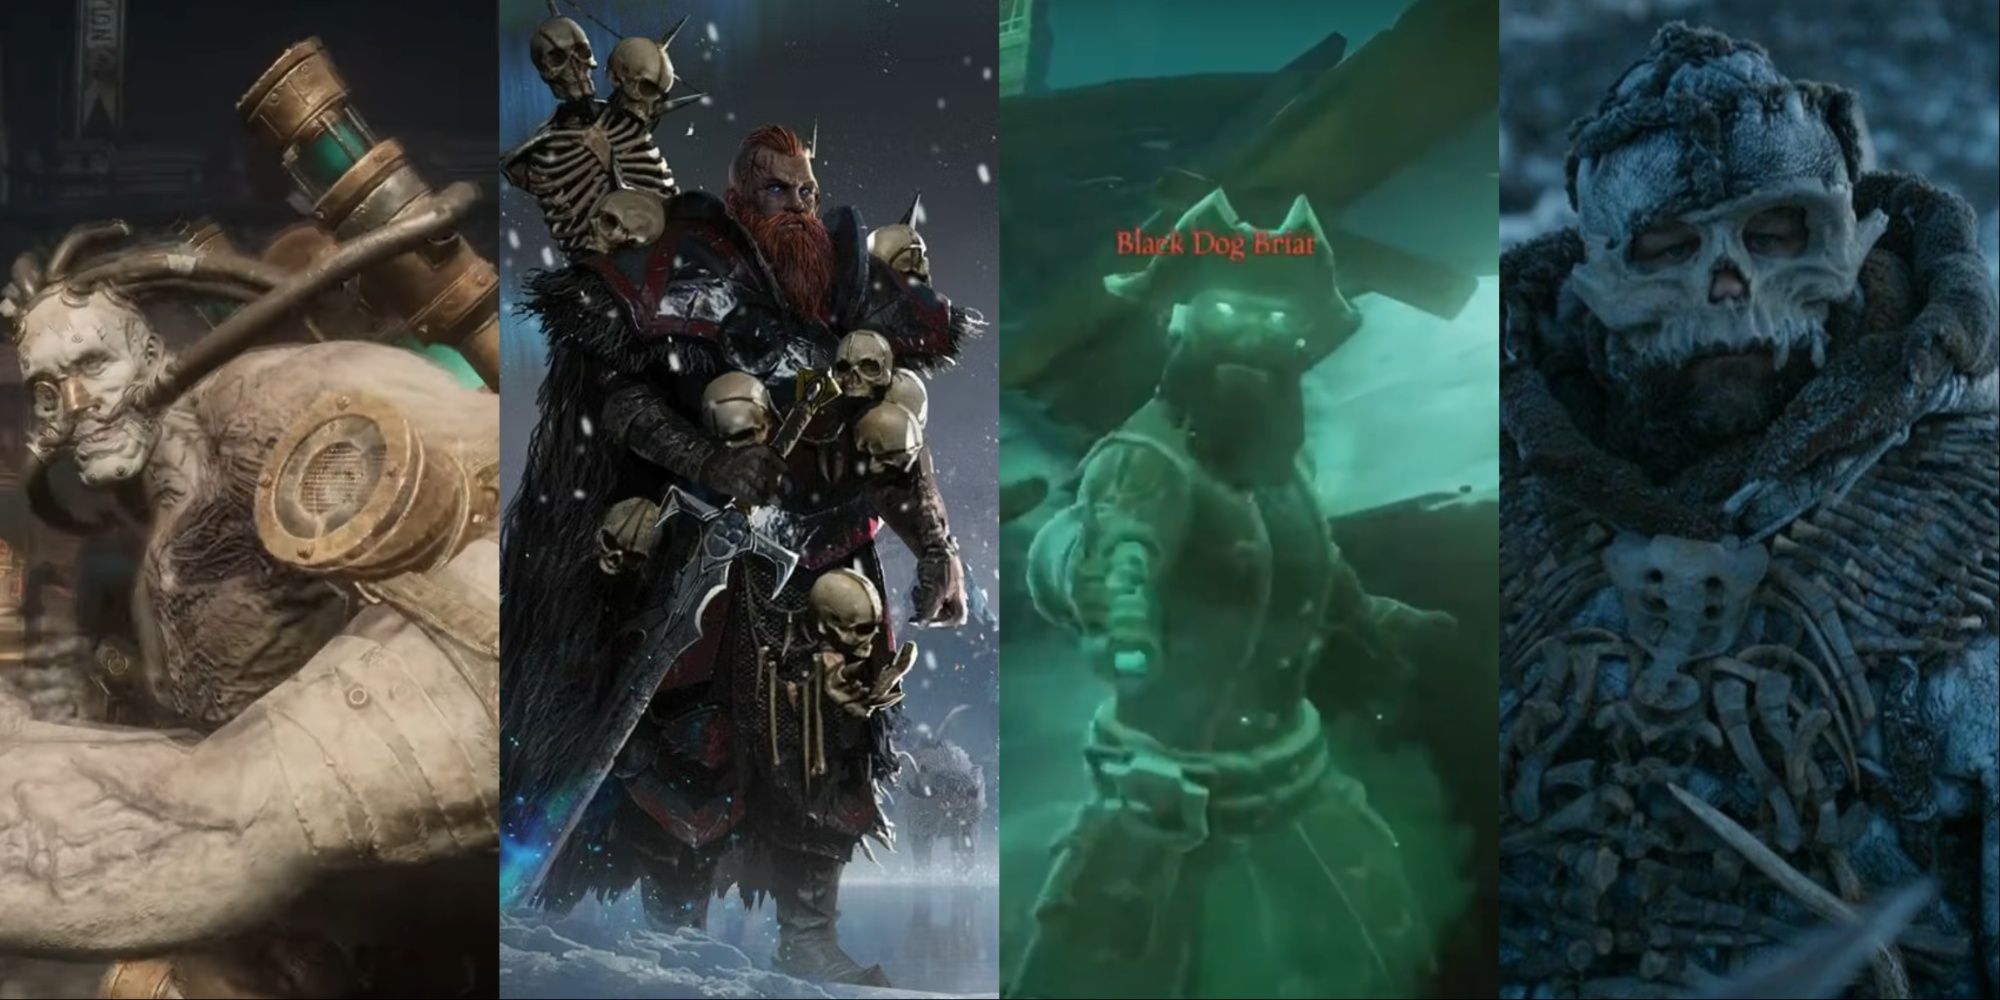 Four-image collage of Champion Victor before the start of the boss fight, Wulfrik the Wanderer from Total Warhammer, Black Dog Briar from Sea of Thieves, and Edward Dogliani's character from Game of Thrones - Rattleshirt.